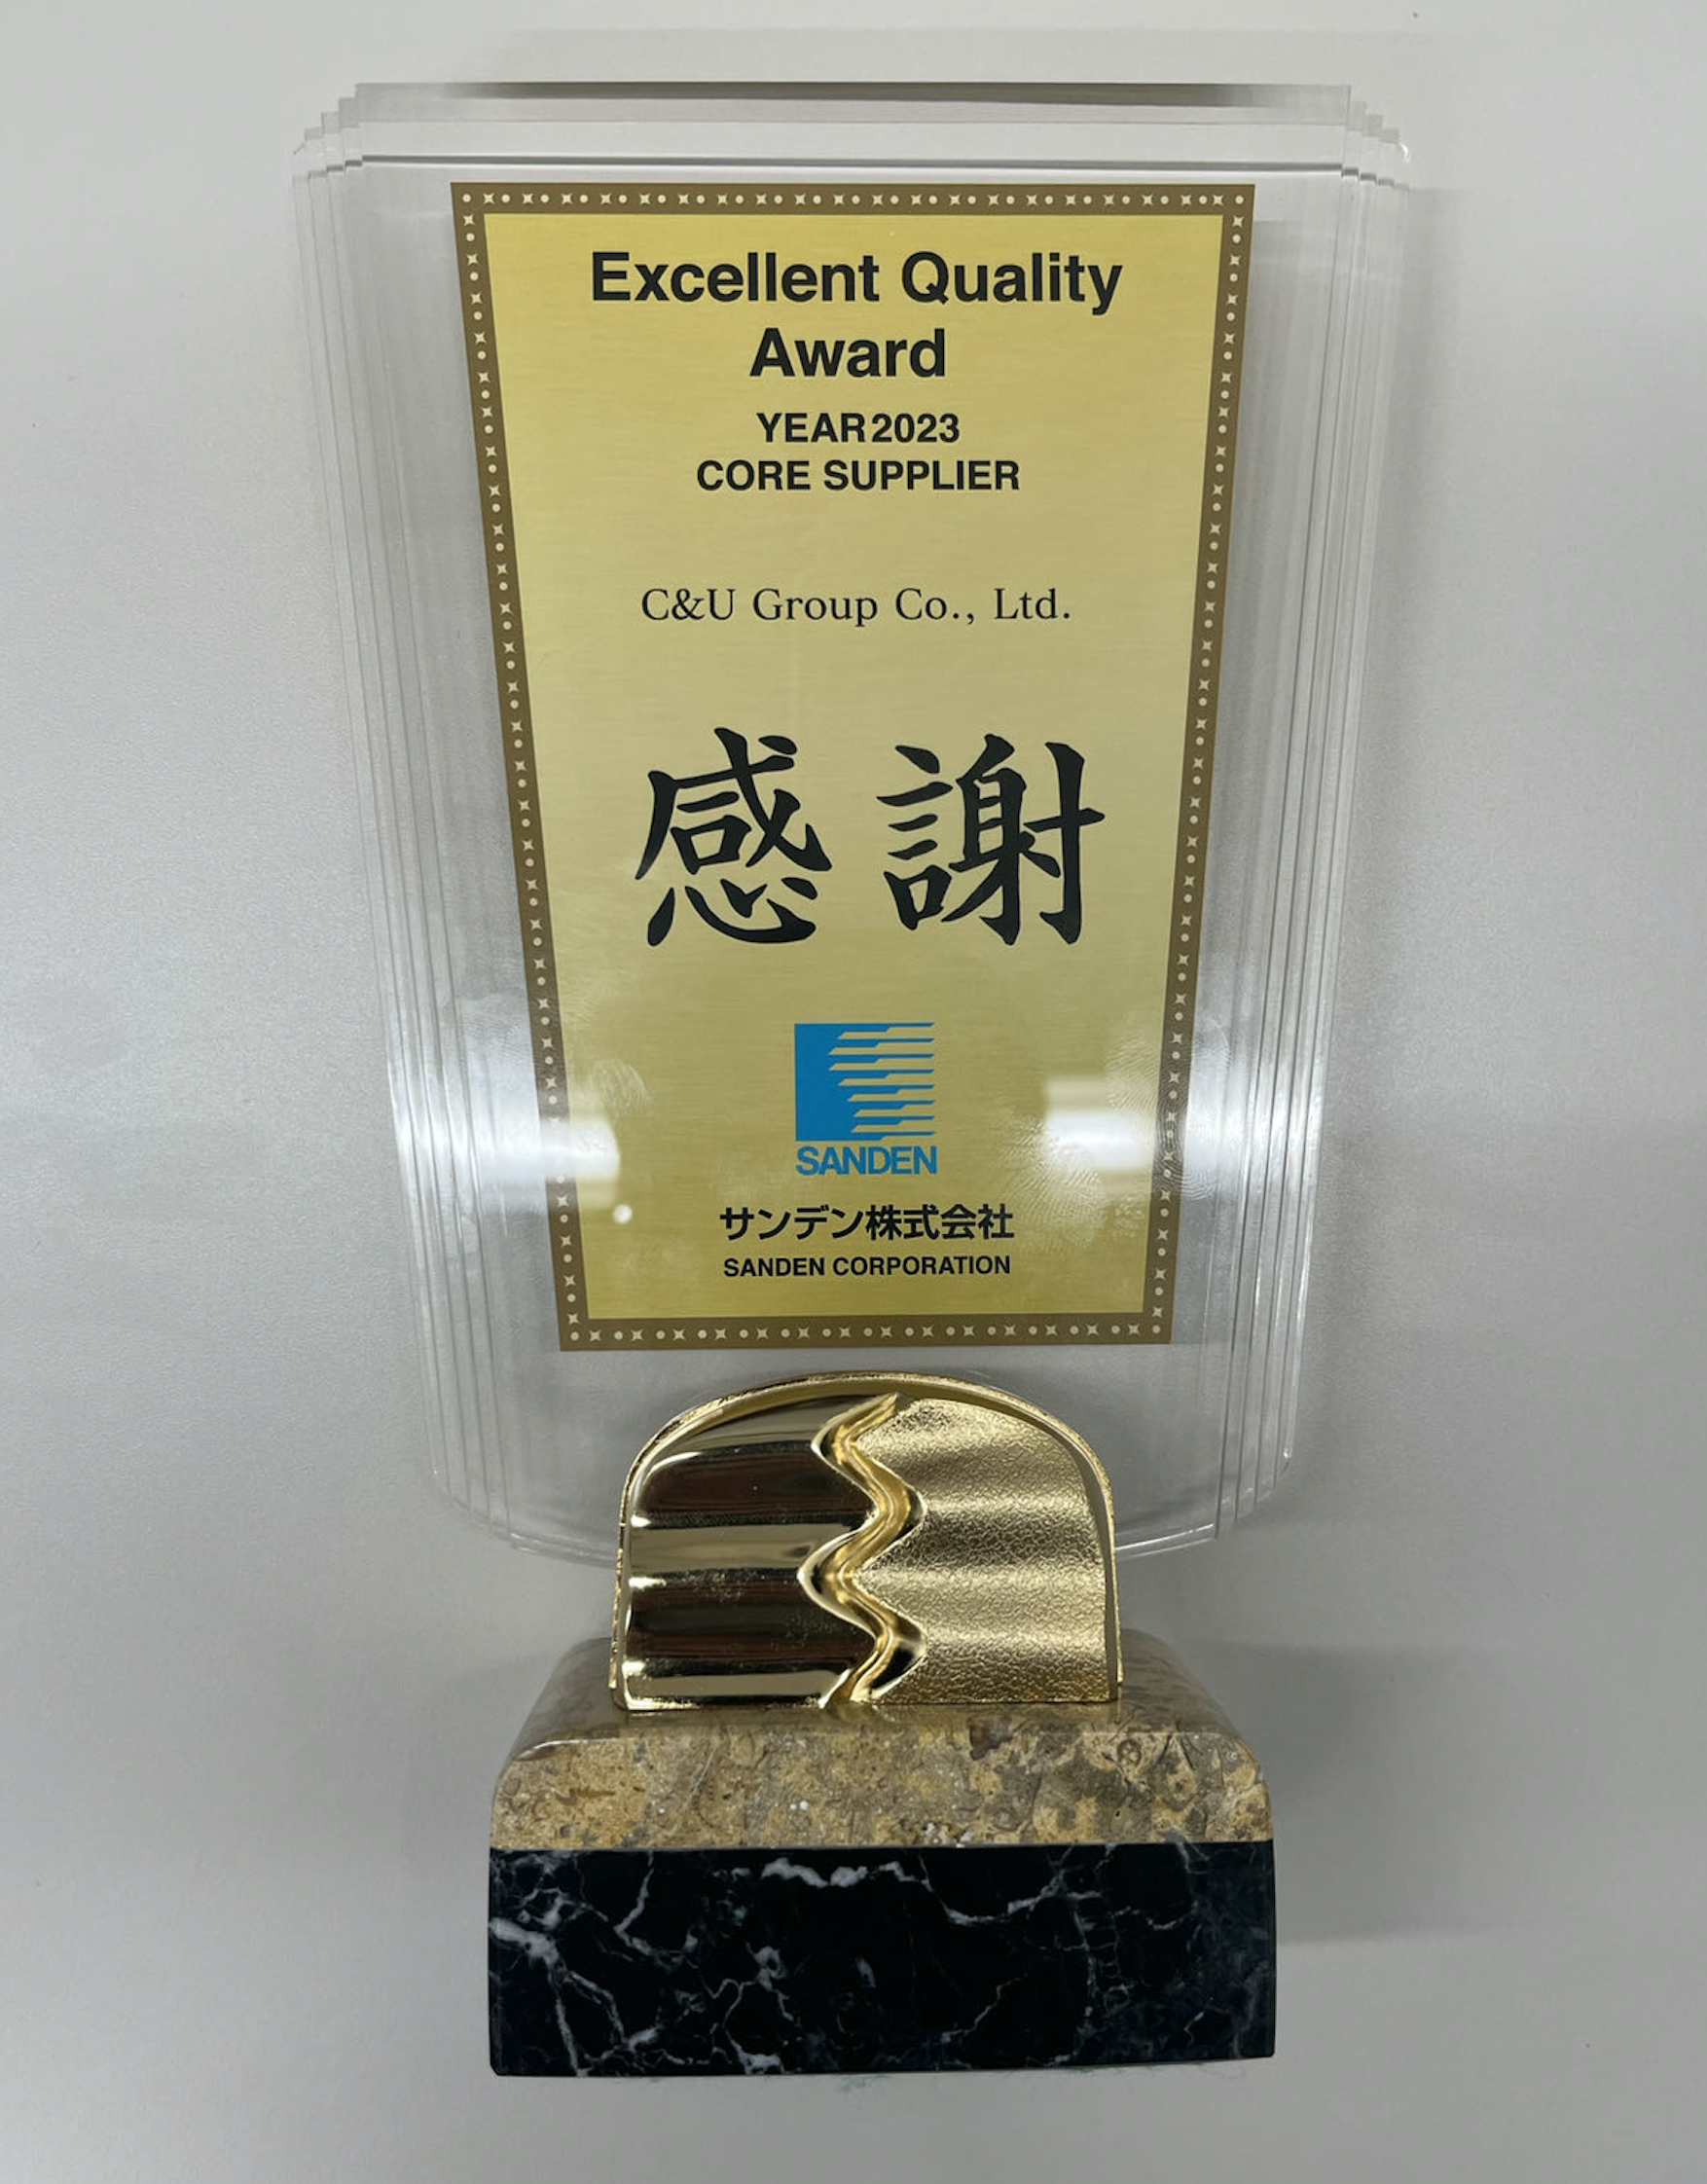 Excellent Quality Award